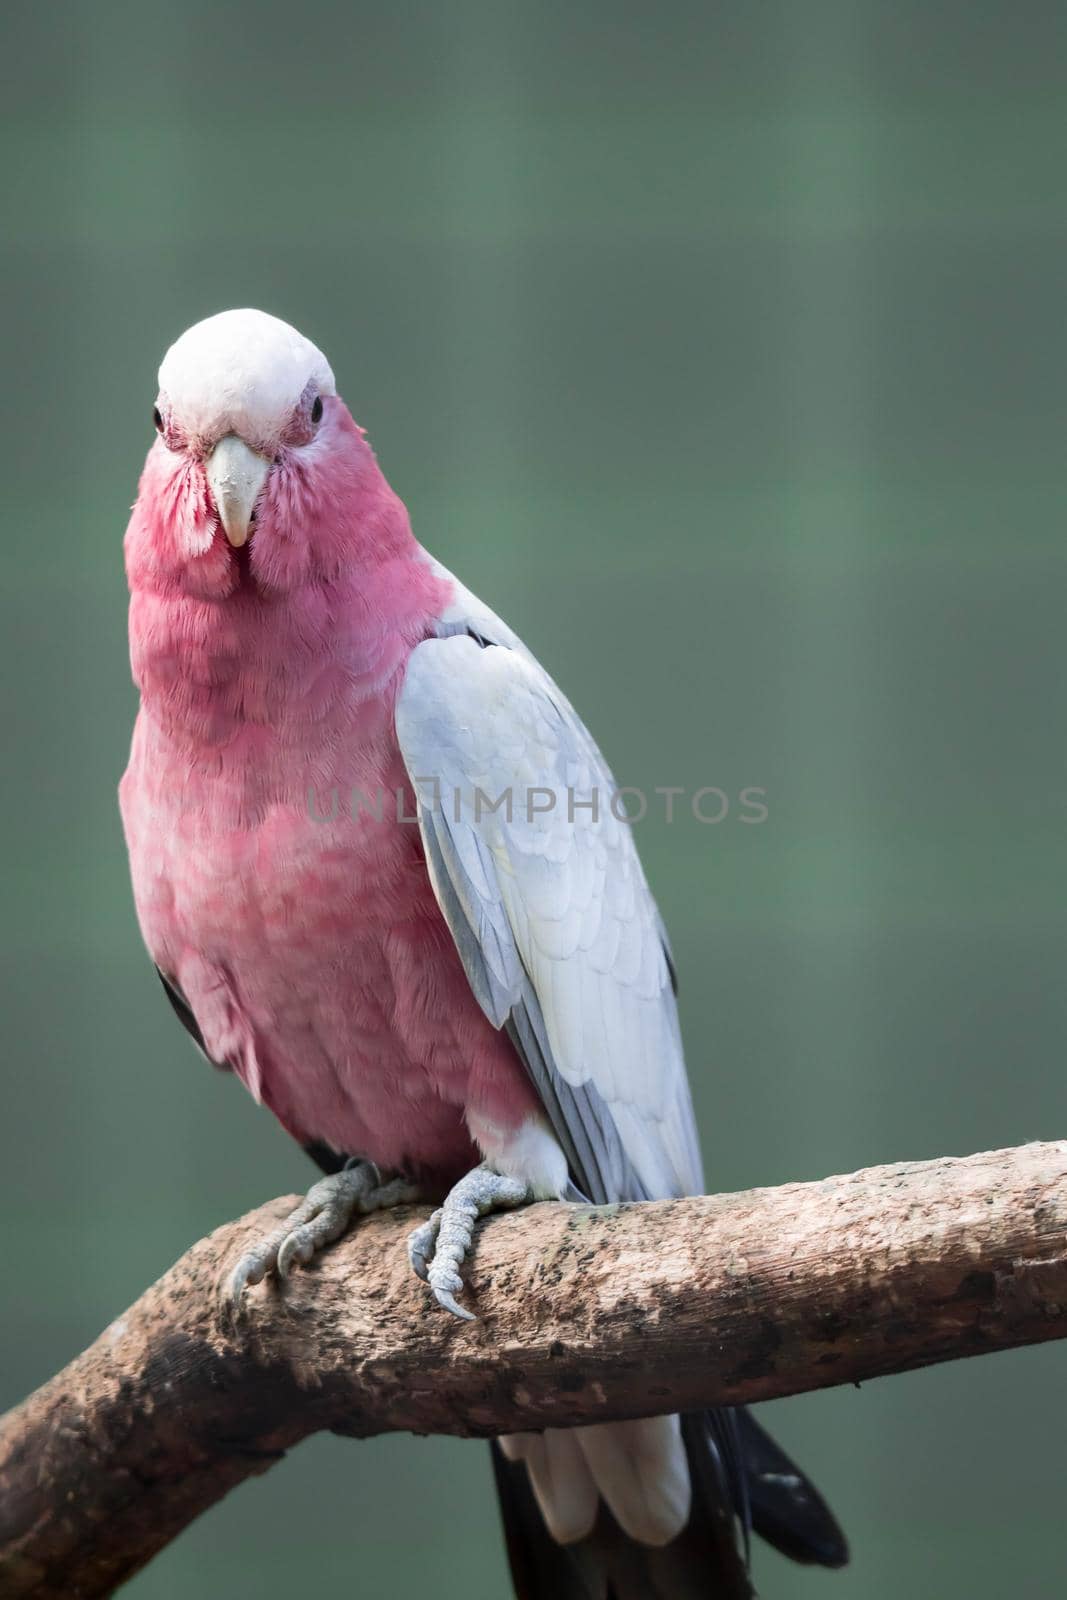 Galah, Eolophus roseicapilla, also known as the Rose-breasted Cockatoo. Sitting on a branch